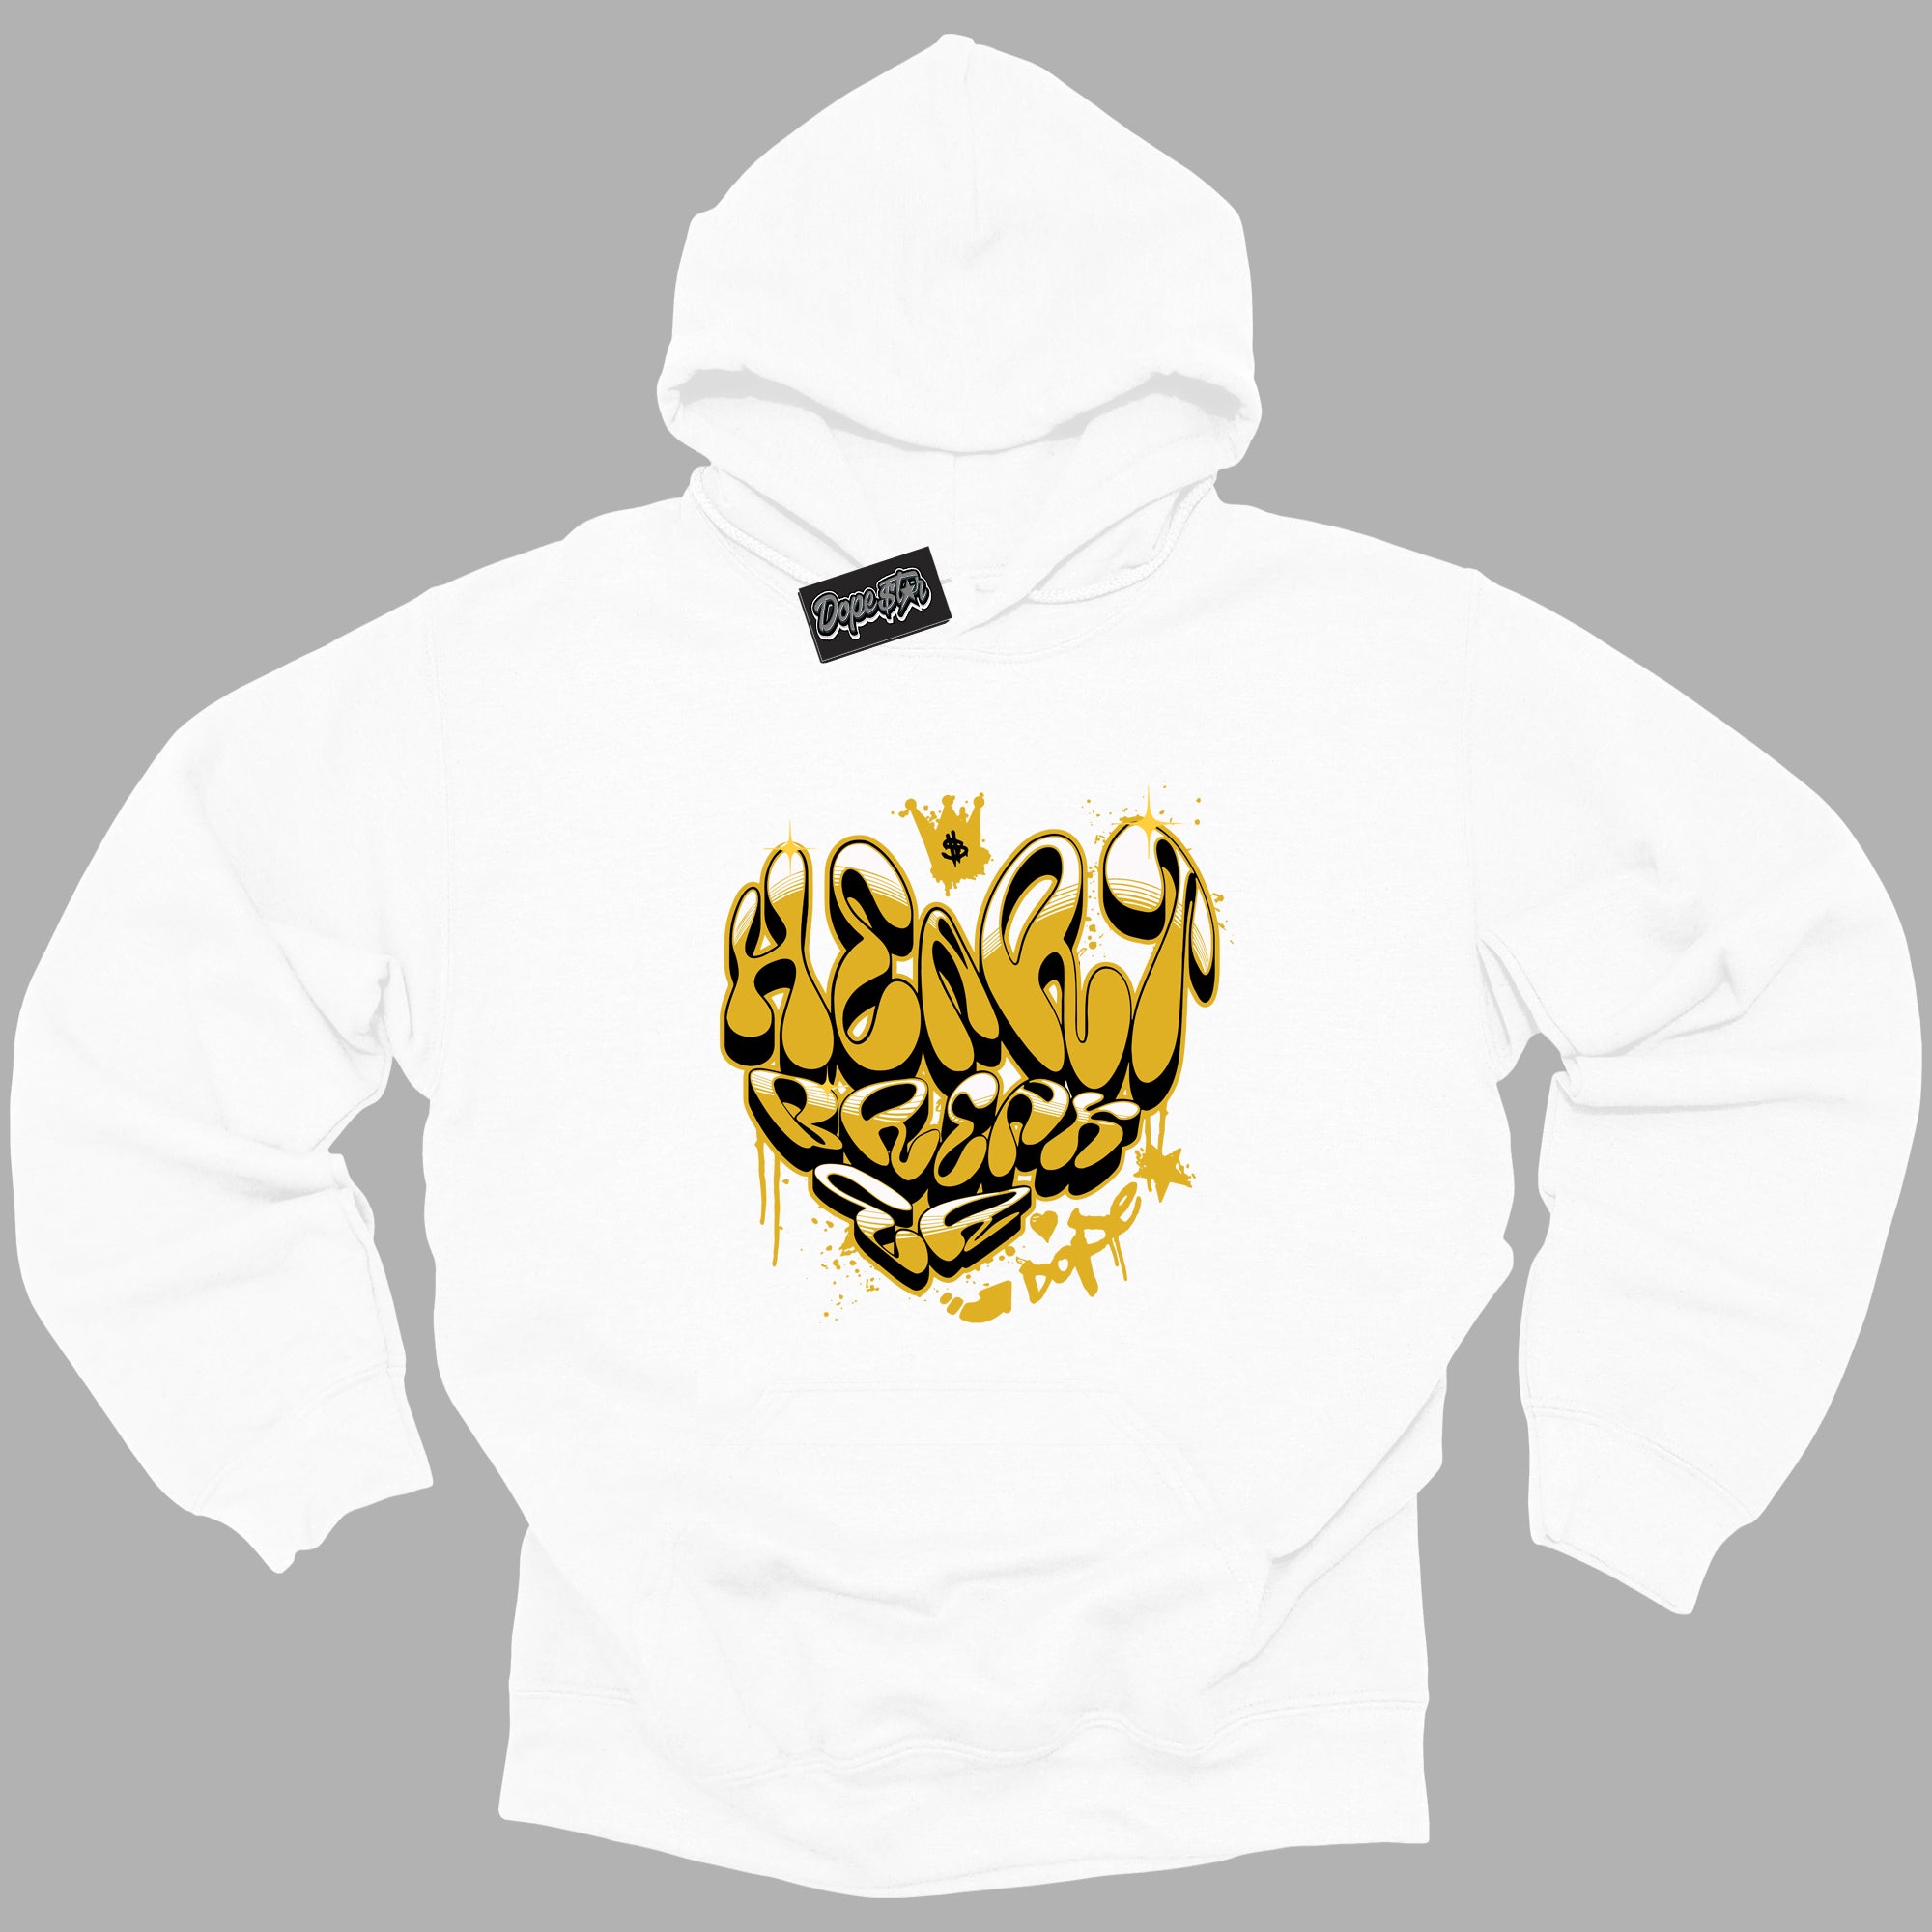 Cool White Hoodie with “ Heartbreaker Graffiti ”  design that Perfectly Matches Yellow Ochre 6s Sneakers.